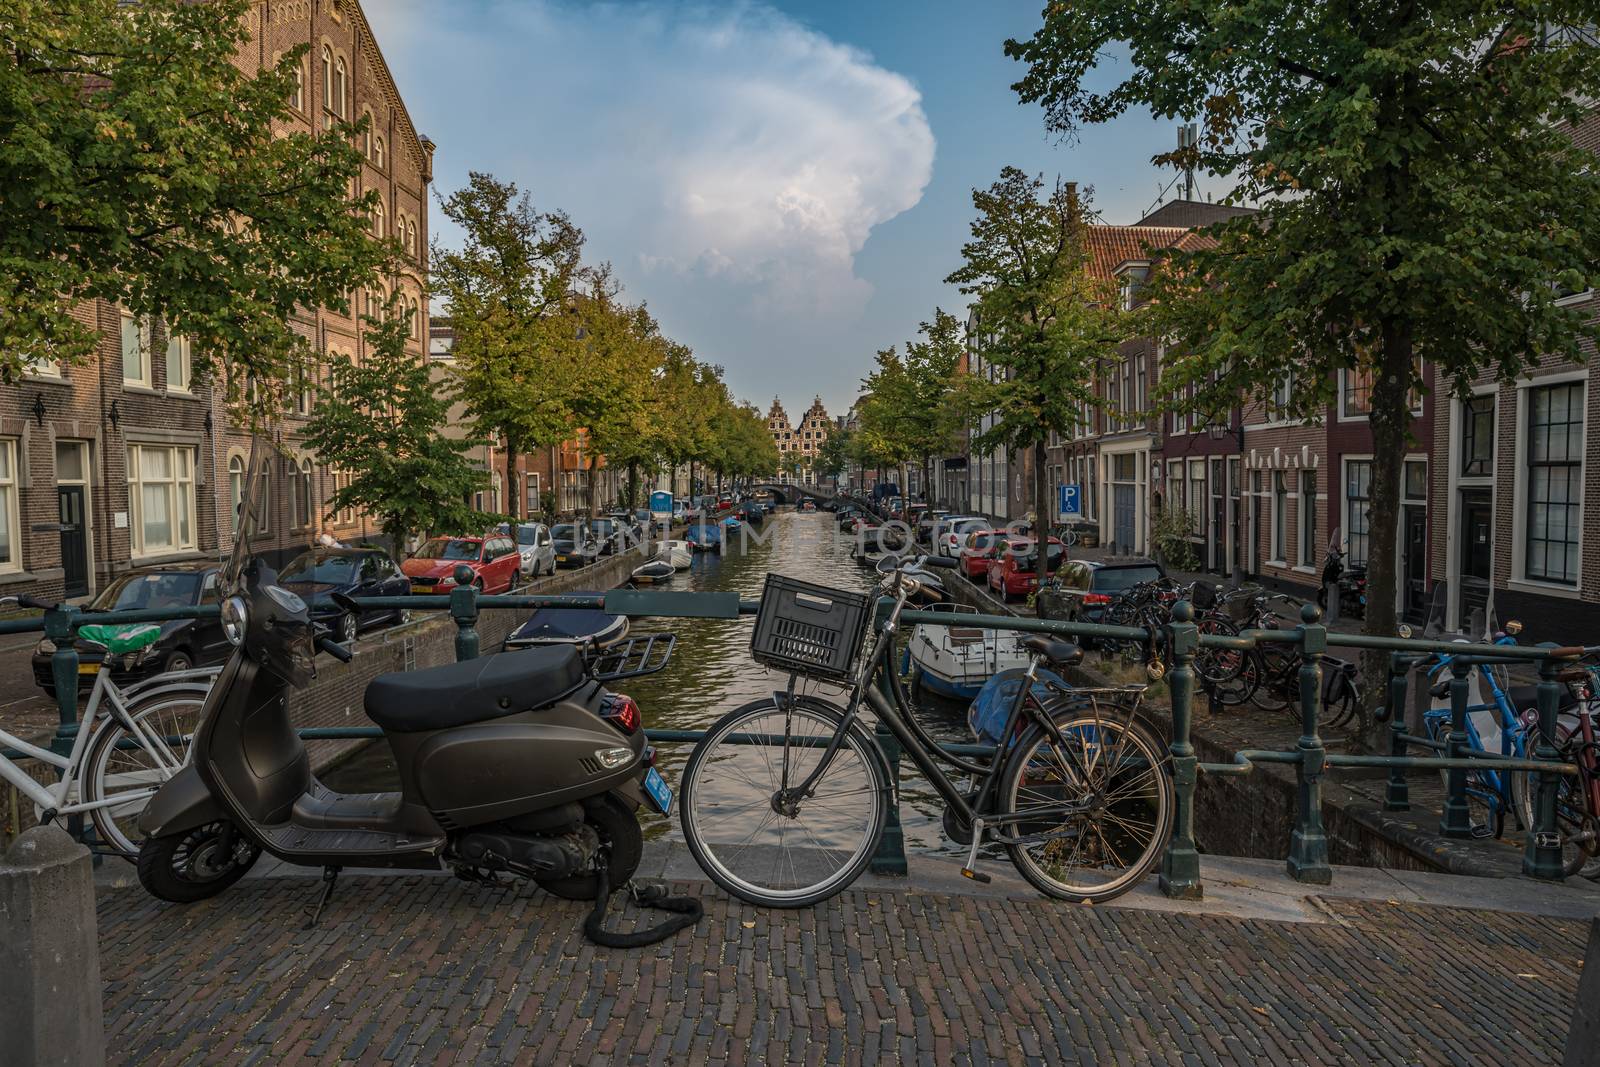 ordinary life on street in holland amsterdam during summer